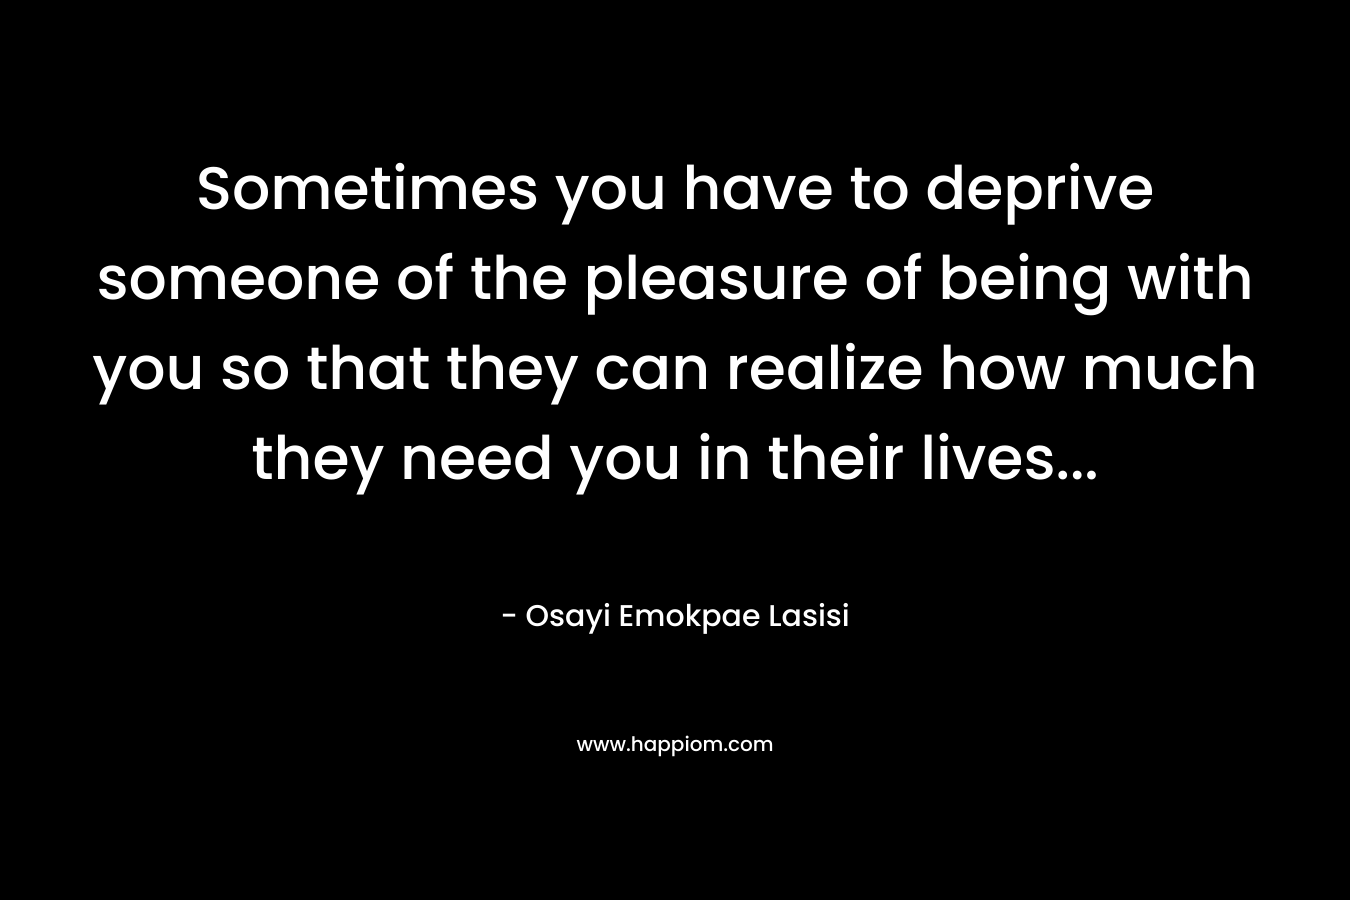 Sometimes you have to deprive someone of the pleasure of being with you so that they can realize how much they need you in their lives… – Osayi Emokpae Lasisi